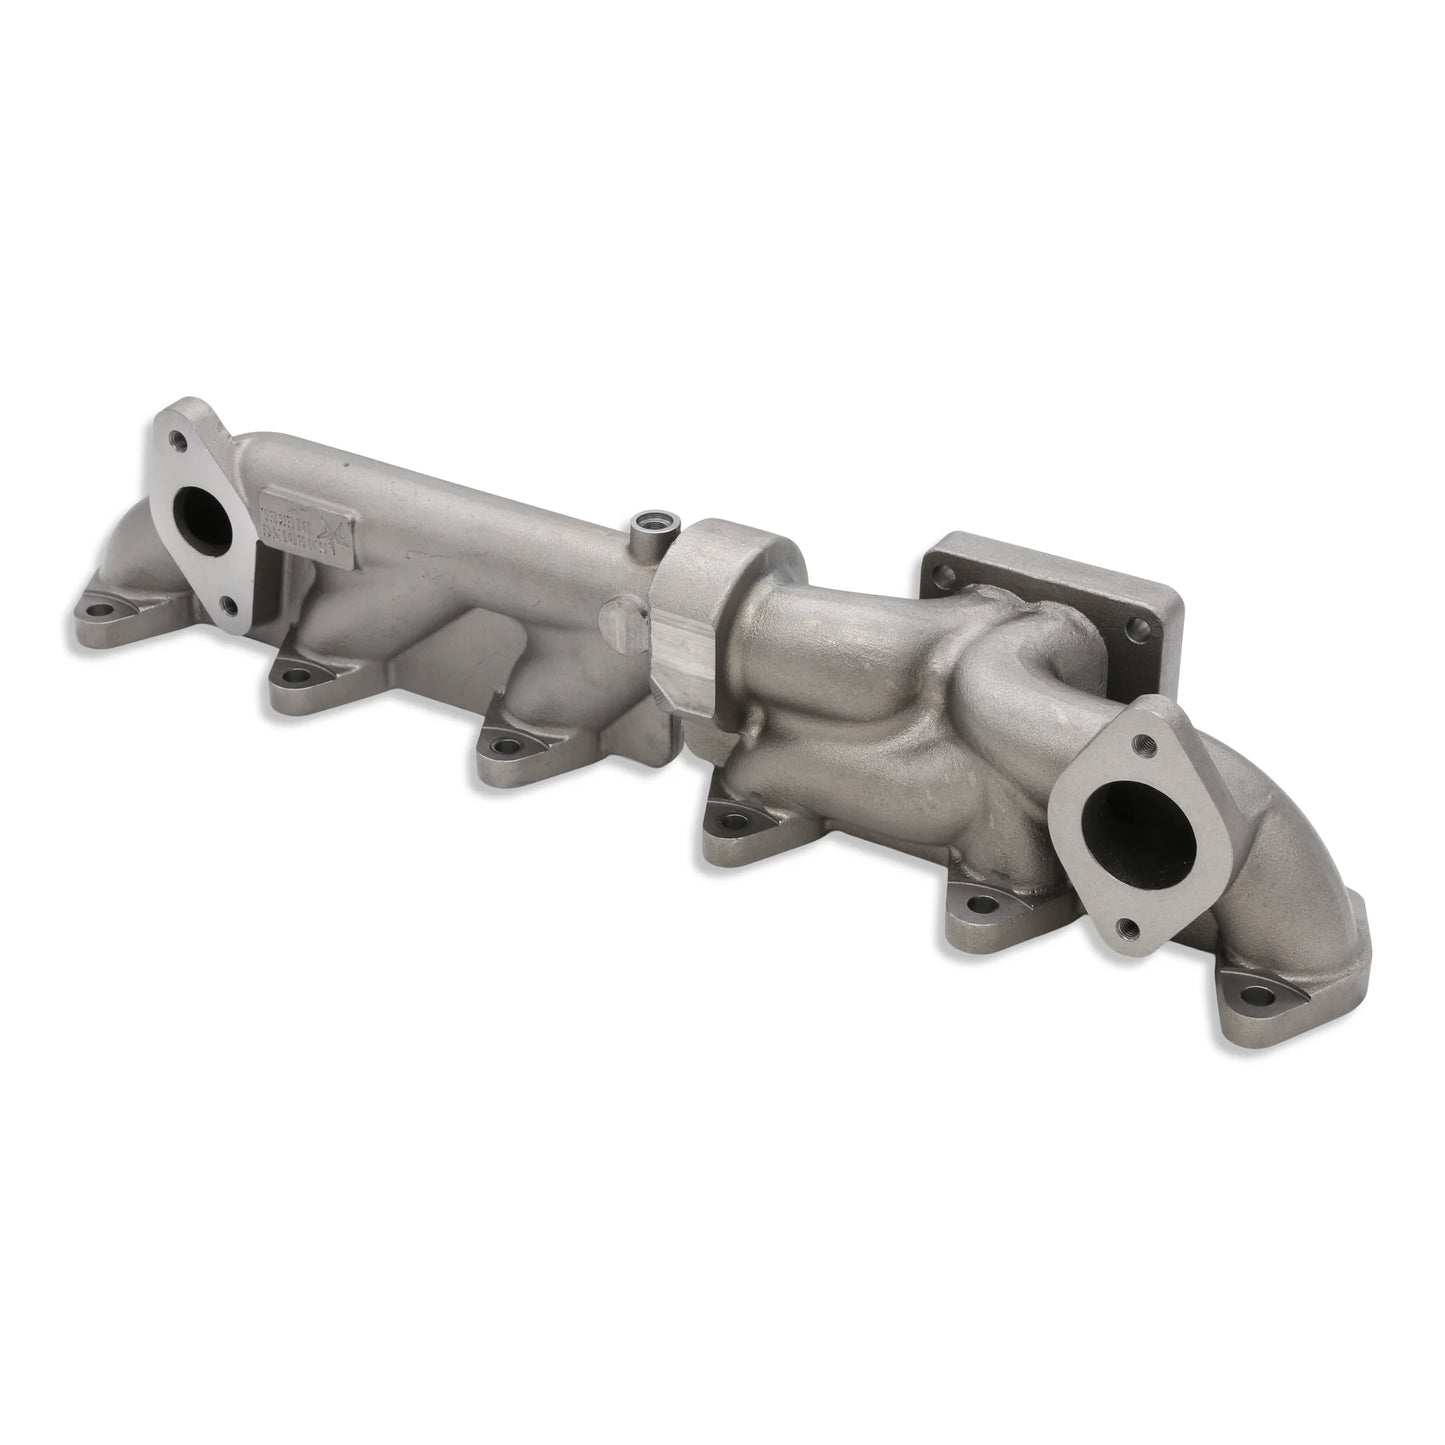 MDC Diesel 2 Piece High Flow OEM Flange Replacement Exhaust Manifold for the 2007.5-18 6.7L Cummins